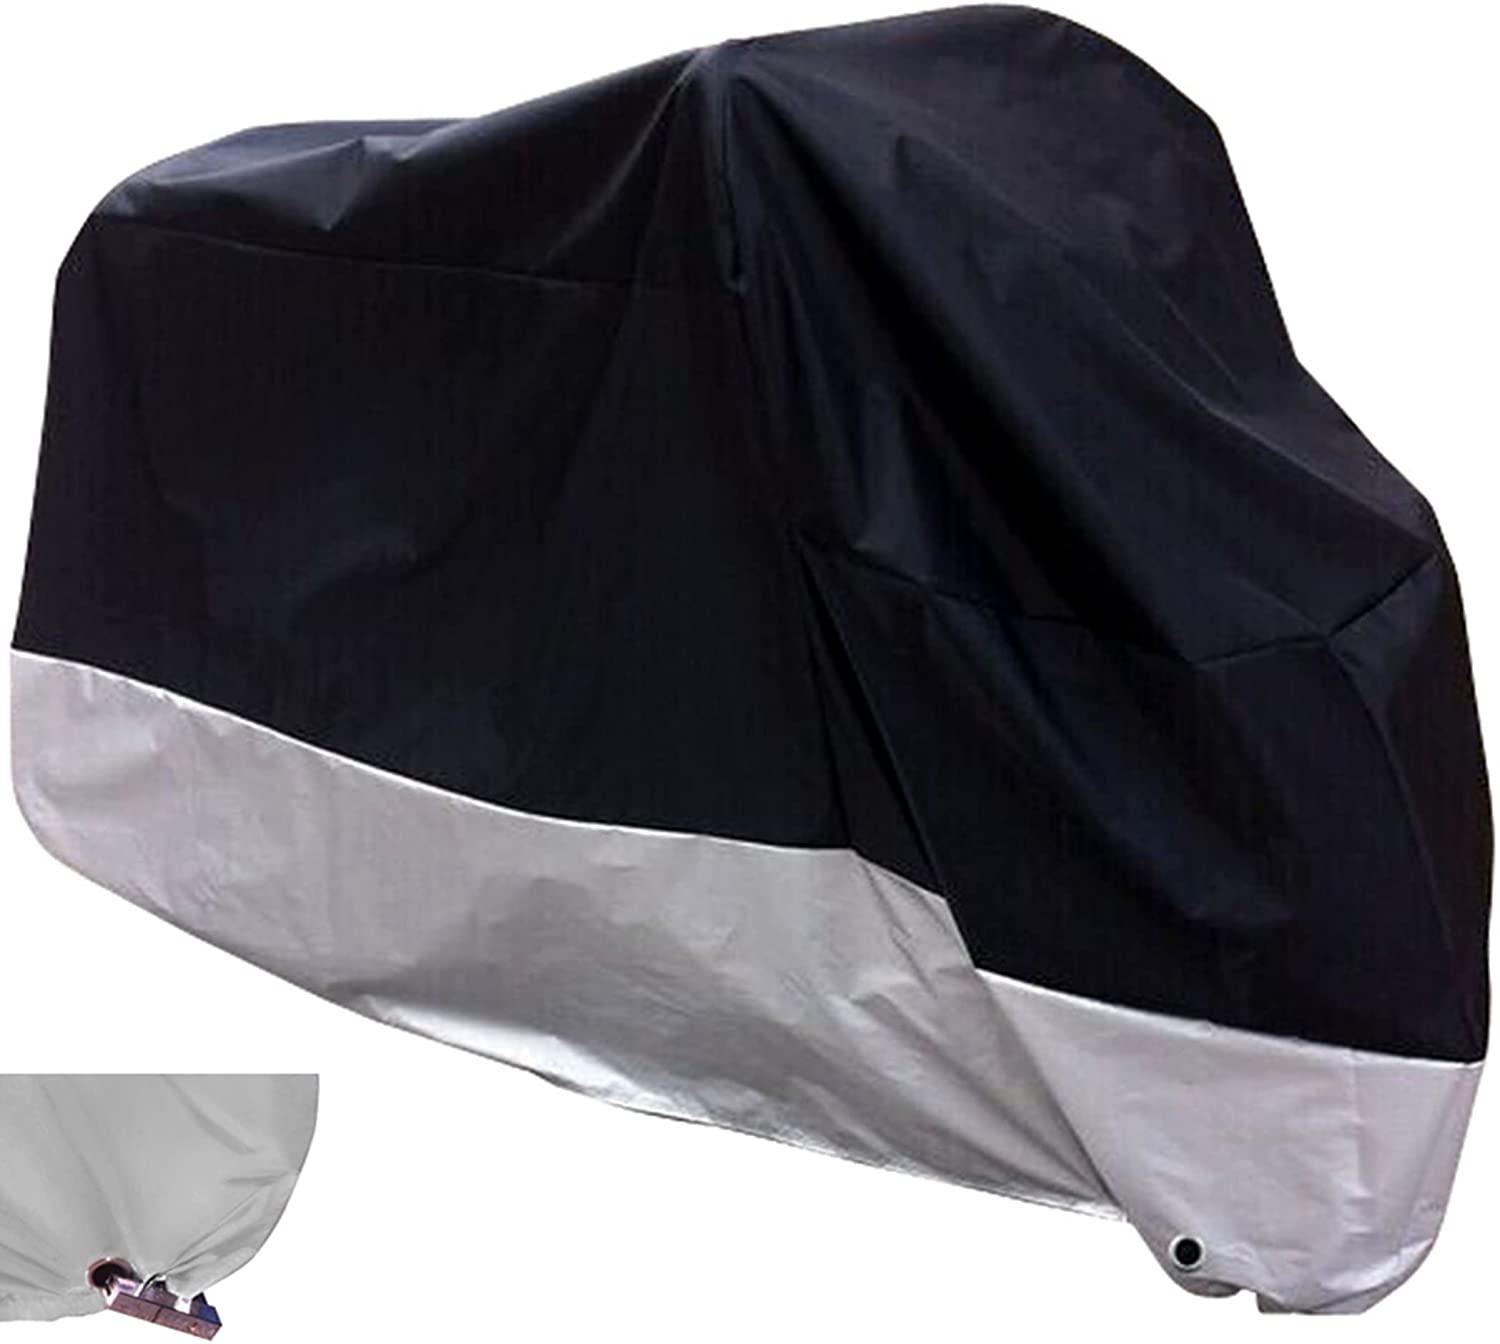 All Season Waterproof Motorcycle Cover for $9.89